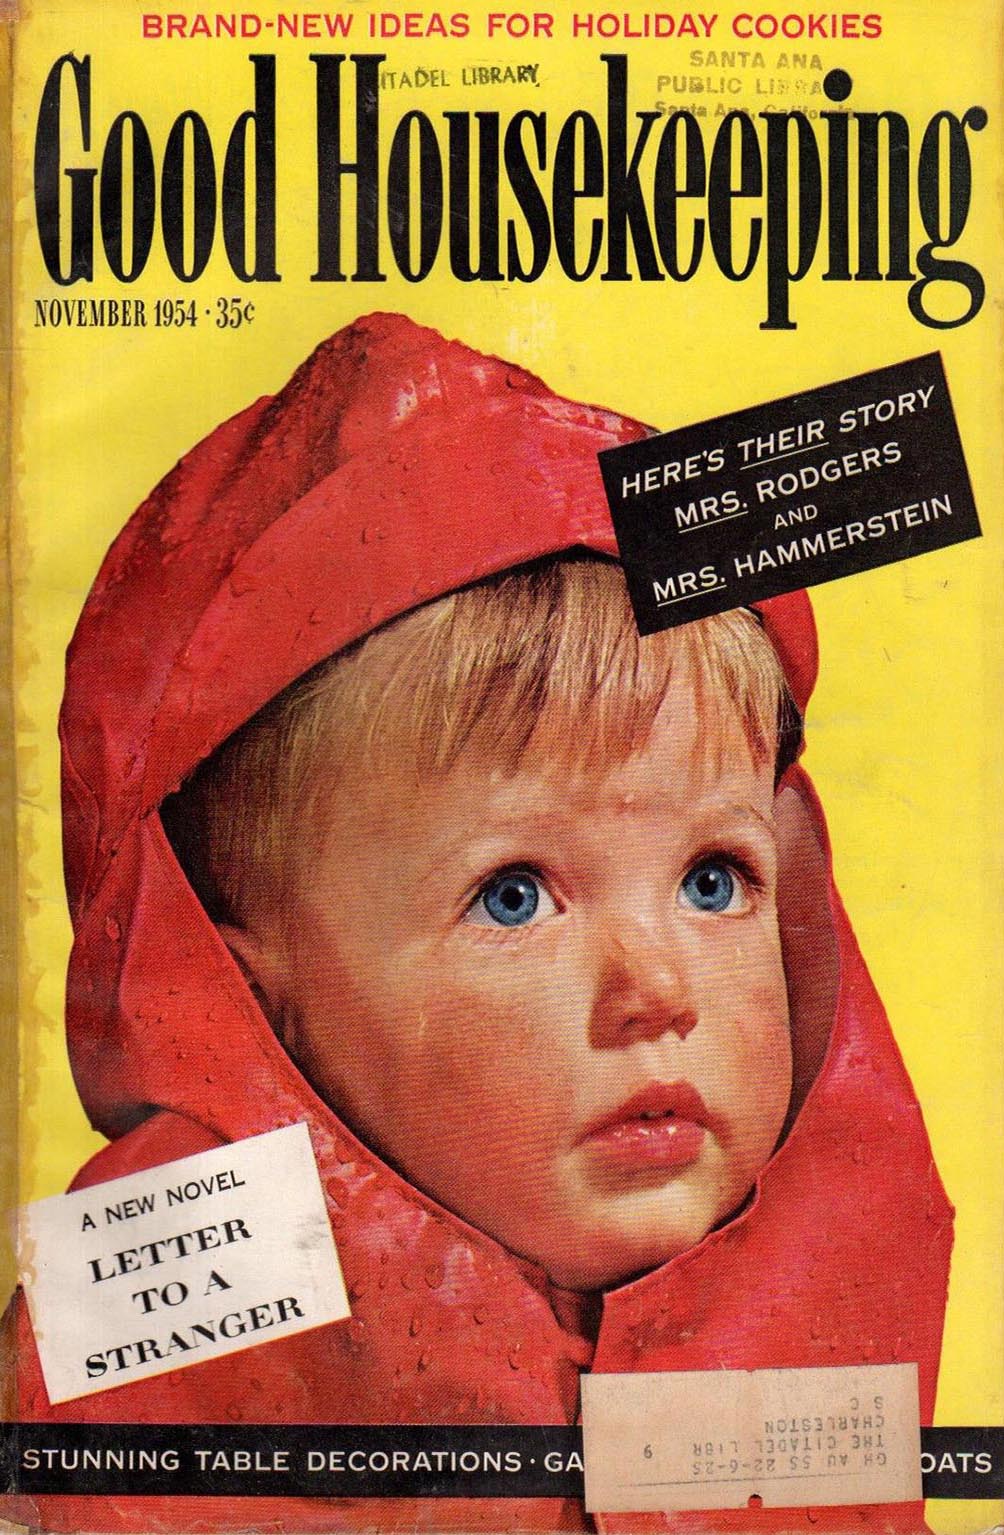 Good Housekeeping November 1954 magazine back issue Good Housekeeping magizine back copy Good Housekeeping November 1954 American womens magazine Back Issue Published by Hearst Publishing Corporation. Brand - New Ideas For Holiday Cookies.